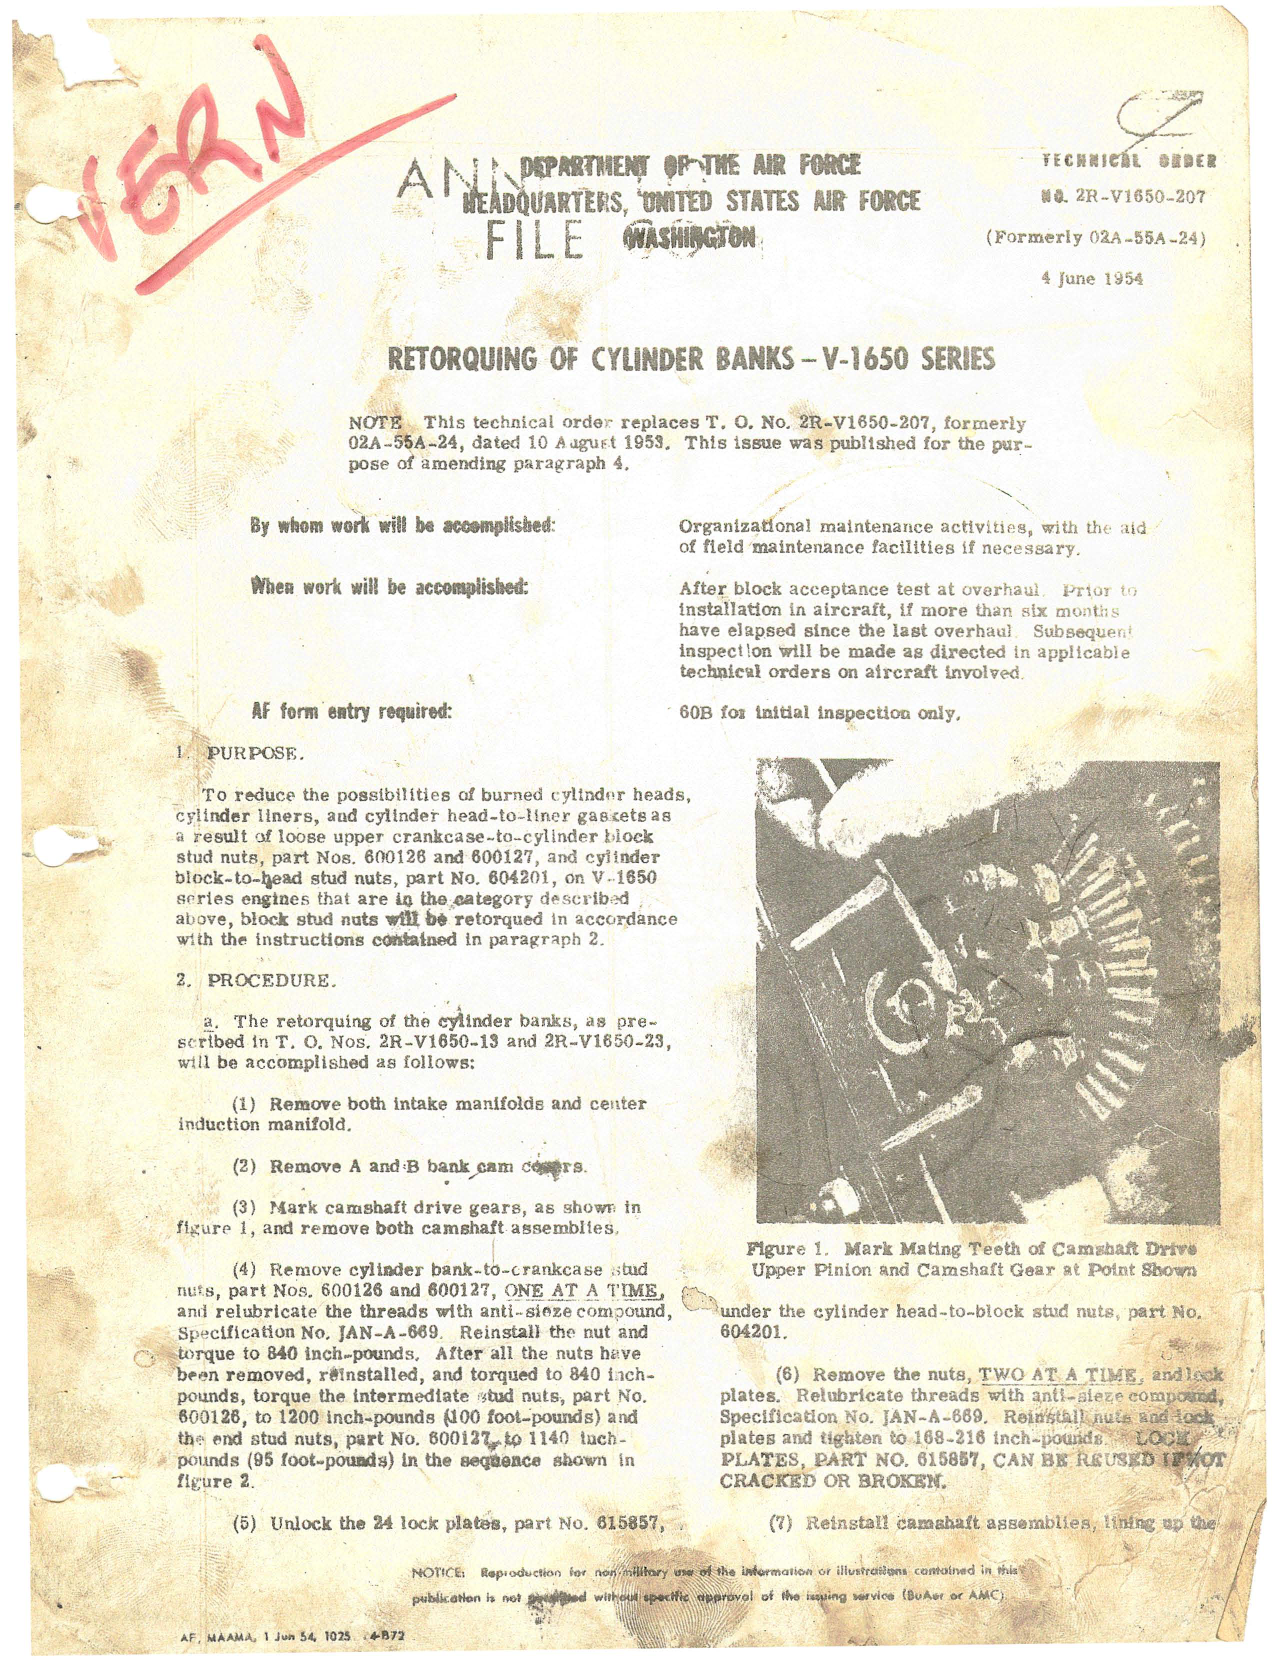 Sample page 154 from AirCorps Library document: Description & Maintenance Instructions - V-1650